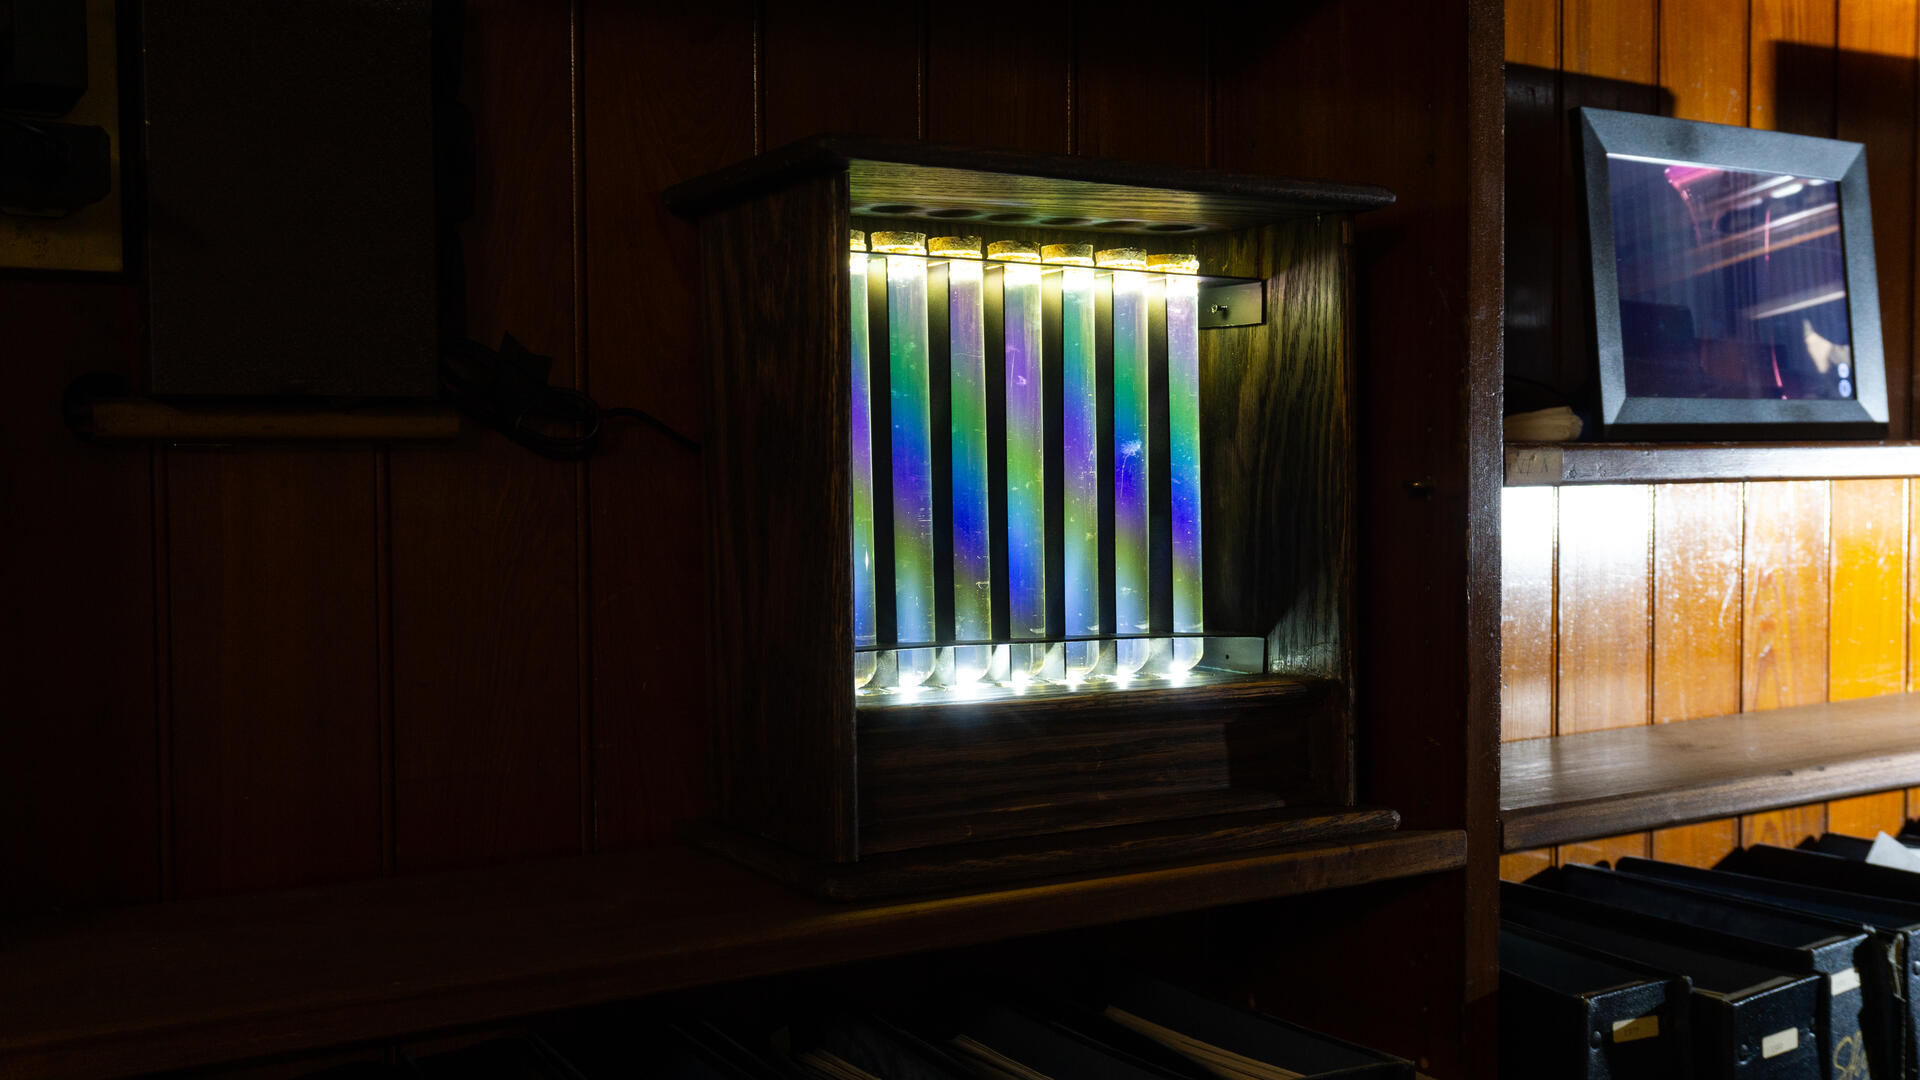 An antique-like wooden box holds a line of test tubes filled with liquids, with iridescent colors forming an arc from the device's arrangement.